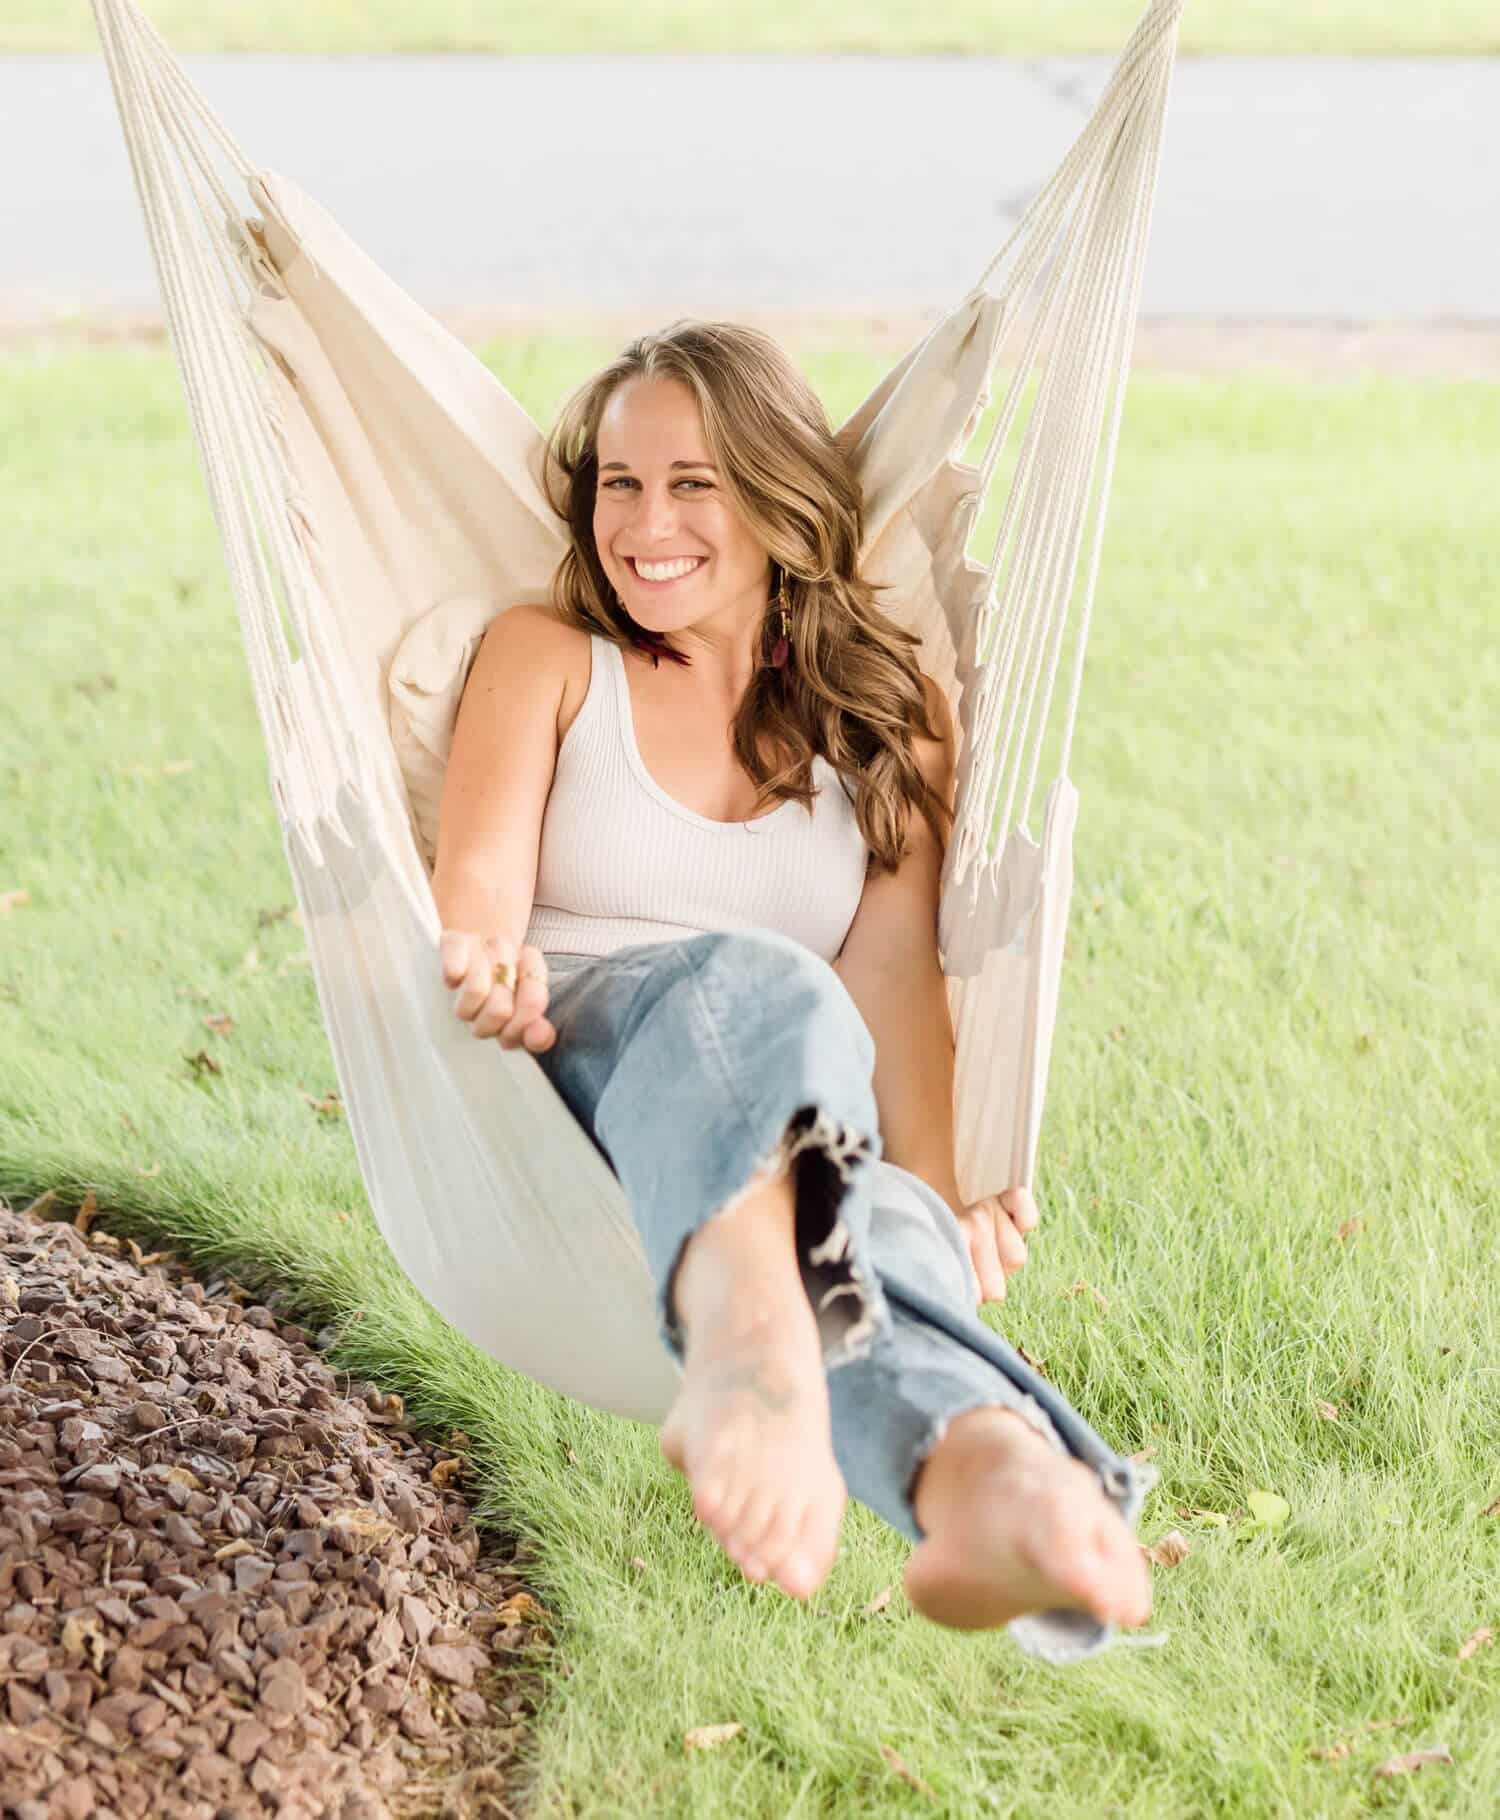 Kylie of Strata Nutrition smiles and playfully swings in a cloth chair hanging from a tree